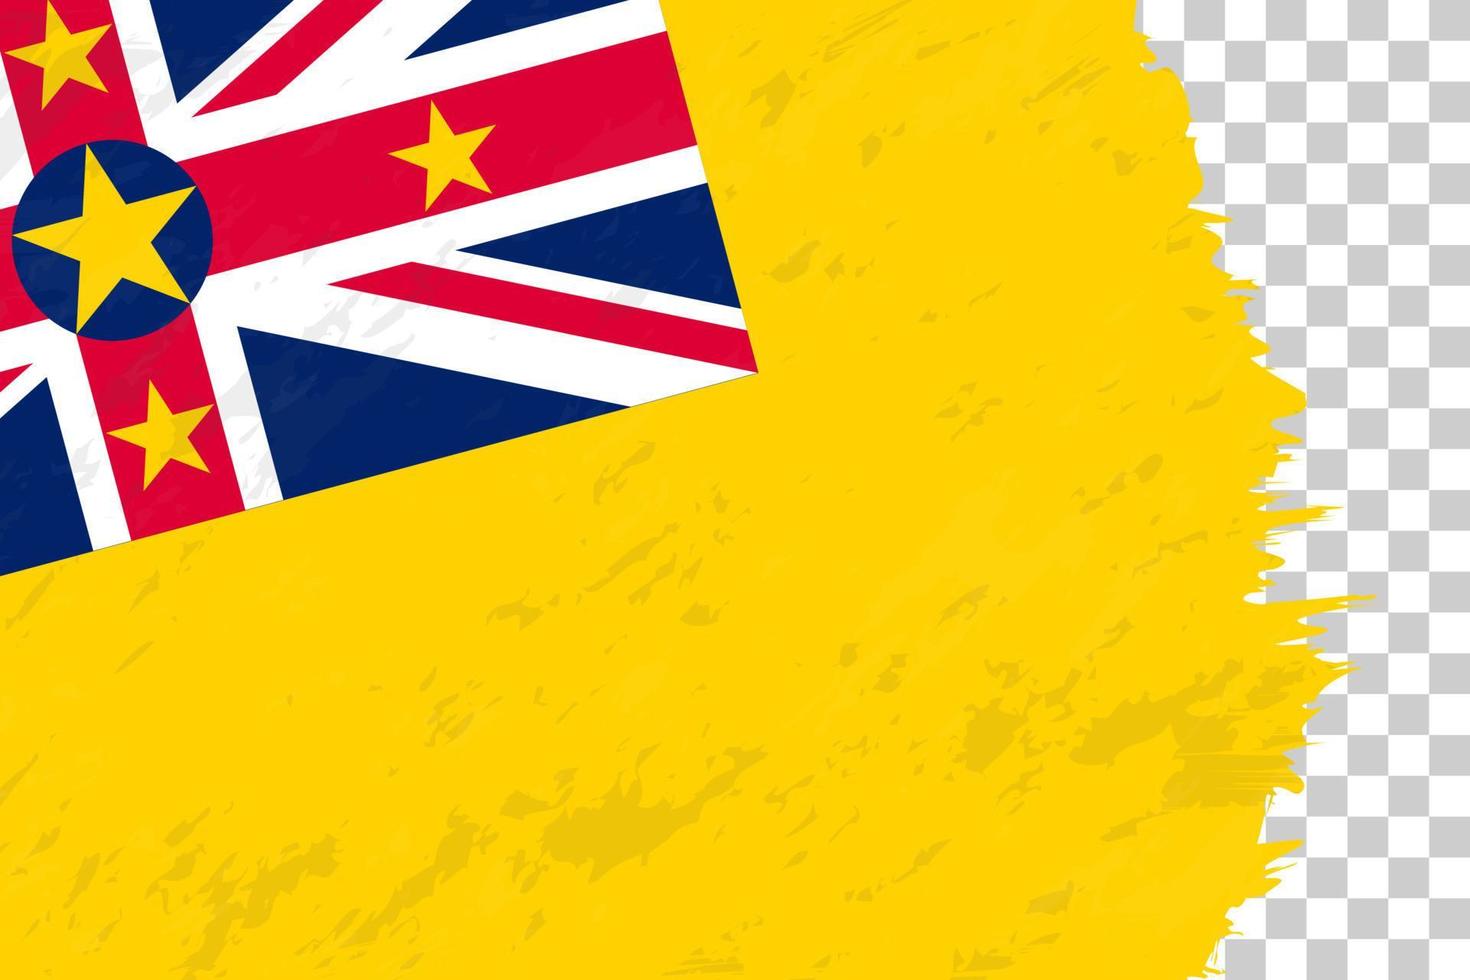 Horizontal Abstract Grunge Brushed Flag of Niue on Transparent Grid. vector